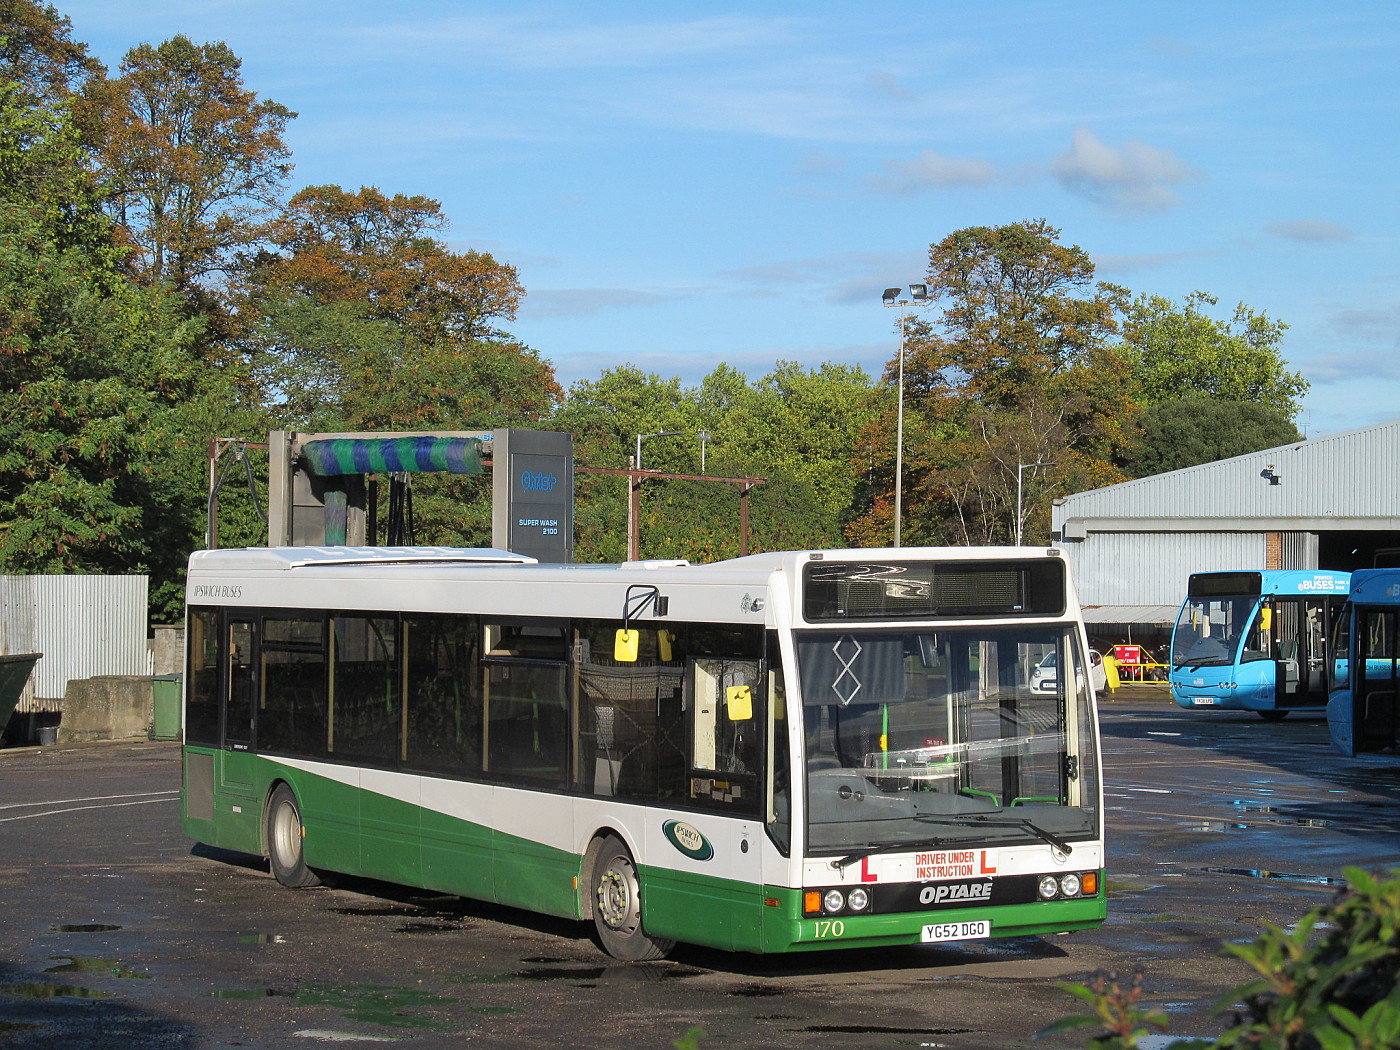 Optare Excel #170